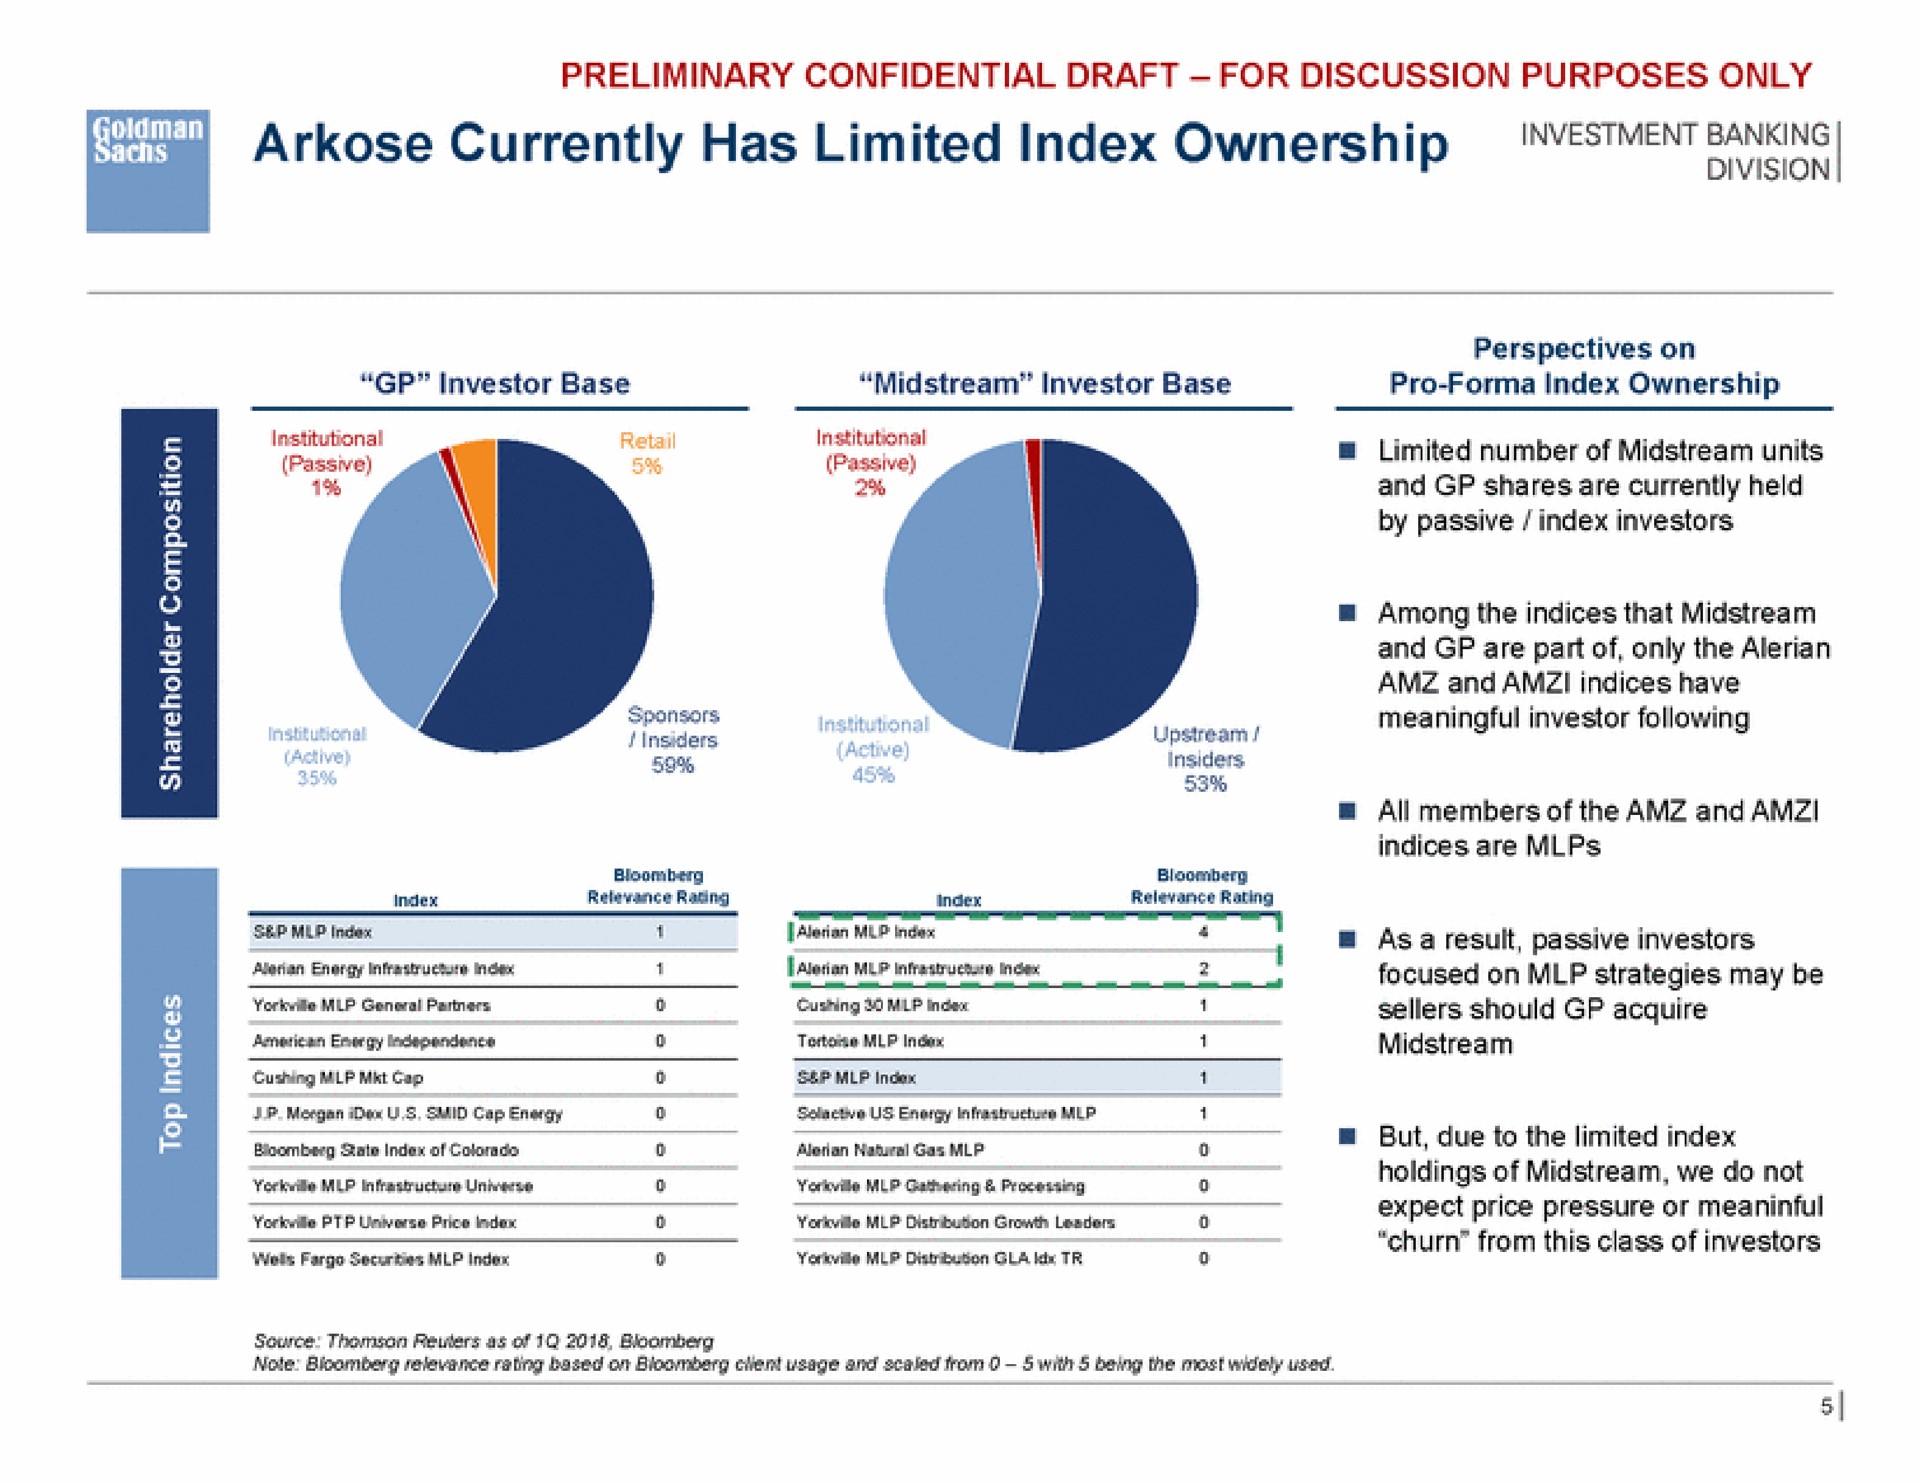 arkose currently has limited index ownership banking limited number of midstream units | Goldman Sachs